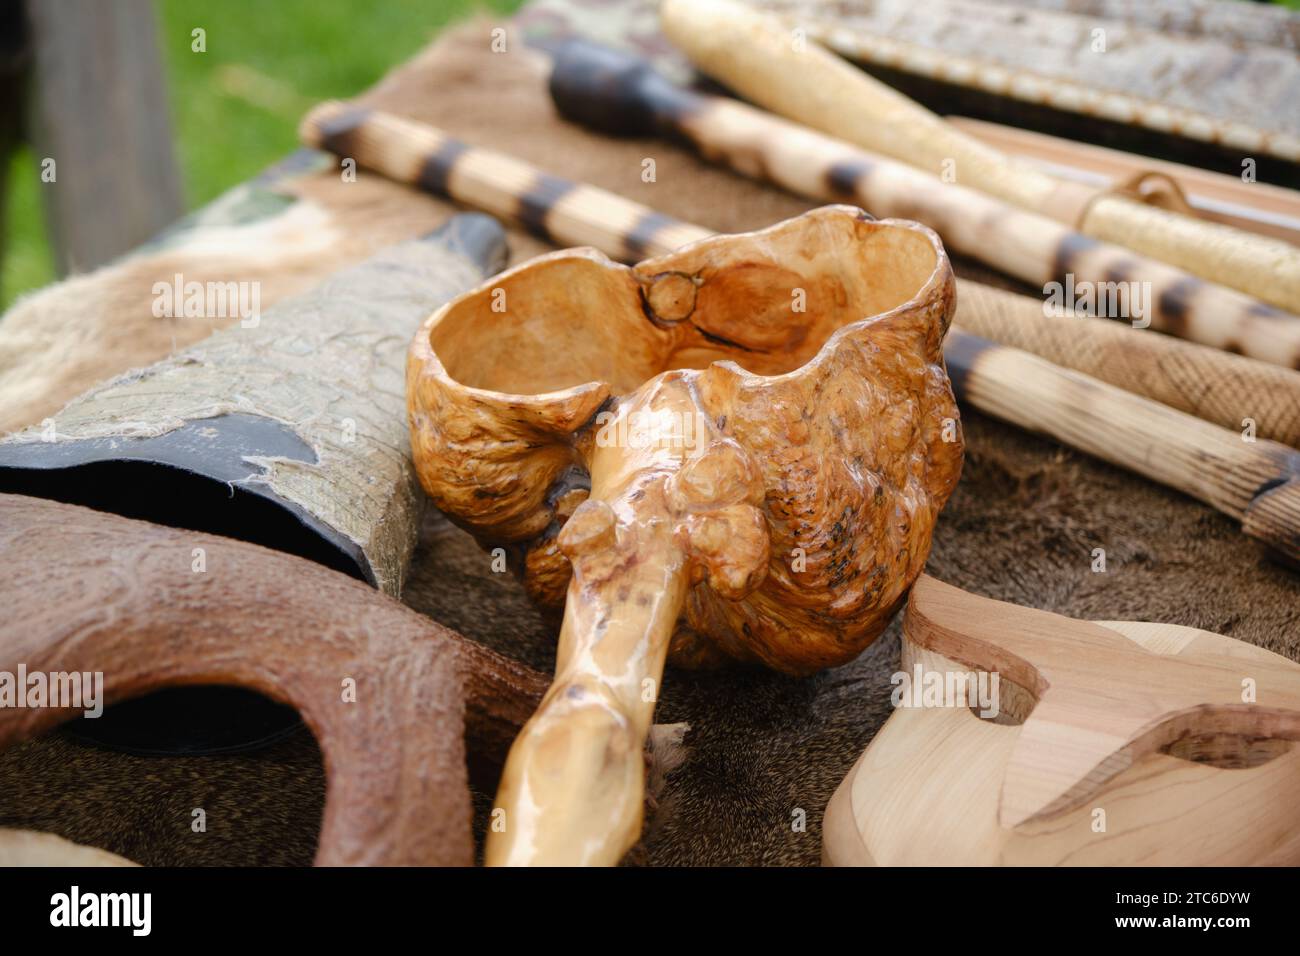 Indigenous scooping wooden tool Stock Photo